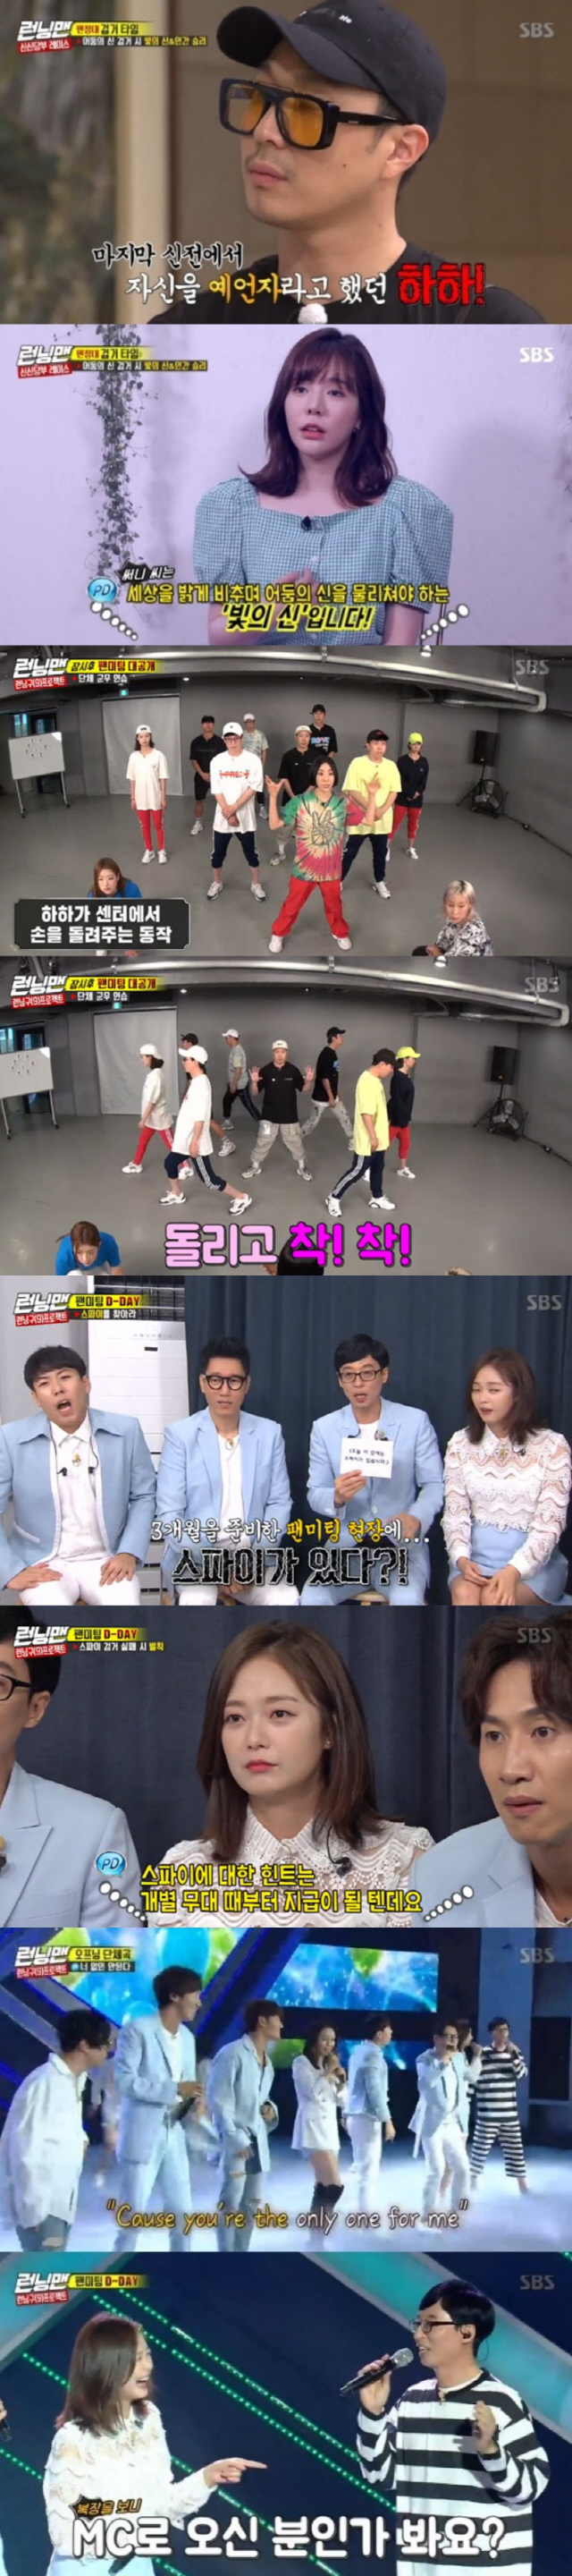 SBS Running Man first unveiled The long-awaited 9th anniversary fan meeting T-Shirt, soaring to 7.8% of the highest TV viewer ratings per minute and ranked first in 2049 target TV viewer ratings.According to Nielsen Korea, a TV viewer rating research institute, Running Man, which was broadcast on the 8th, recorded 3.2% of 2049 target TV viewer ratings, which is an important indicator of major advertising officials, higher than last week (based on the second part of the metropolitan area TV viewer ratings), I kept the position.On the day of the broadcast, the final results of the New Shin-dangbu couple race were released last week.Girls Generation Sunny, singer Stern, actor Kim Yewon, and Jang Yewon announcer appeared and a psychological exhibition of light god, dark god, human beings was held.Members understood that the god of darkness could be a prophet during the reasoning, and raised Haha as the God of Darkness in the final judgment.Haha was the god of darkness, Sunny was the god of light, and the god of light and human team won.In addition, Running Man was the first domestic fan meeting T-Shirt was also released on the air.The members sweated to show group dance and couple dance to be presented at fan meetings, and they felt a great burden.Eventually, the day came, and the members greeted 2,500 fans.But everyone was happy to see the crew, and the crew released the mission to find Spy. The members were embarrassed to say that they had to find Spy as well as stage performances.Audiences were aware of Spys Identity, and the crew said they offer individual hints with the audiences shouts.Meanwhile, the opening of T-Shirt was decorated Running Manly.Through the opening mission, Yo Jae-Sukman appeared on stage wearing a prison uniform, and the rest of the members dressed up in a wonderful opening costume and performed the opening performance of No You.The scene took the best minute with the highest TV viewer ratings per minute at 7.8 per cent.Fans were greeted by enthusiastic cheers, and Ji Suk-jin announced the start of T-Shirt with a distinctive official slogan called Race Start.